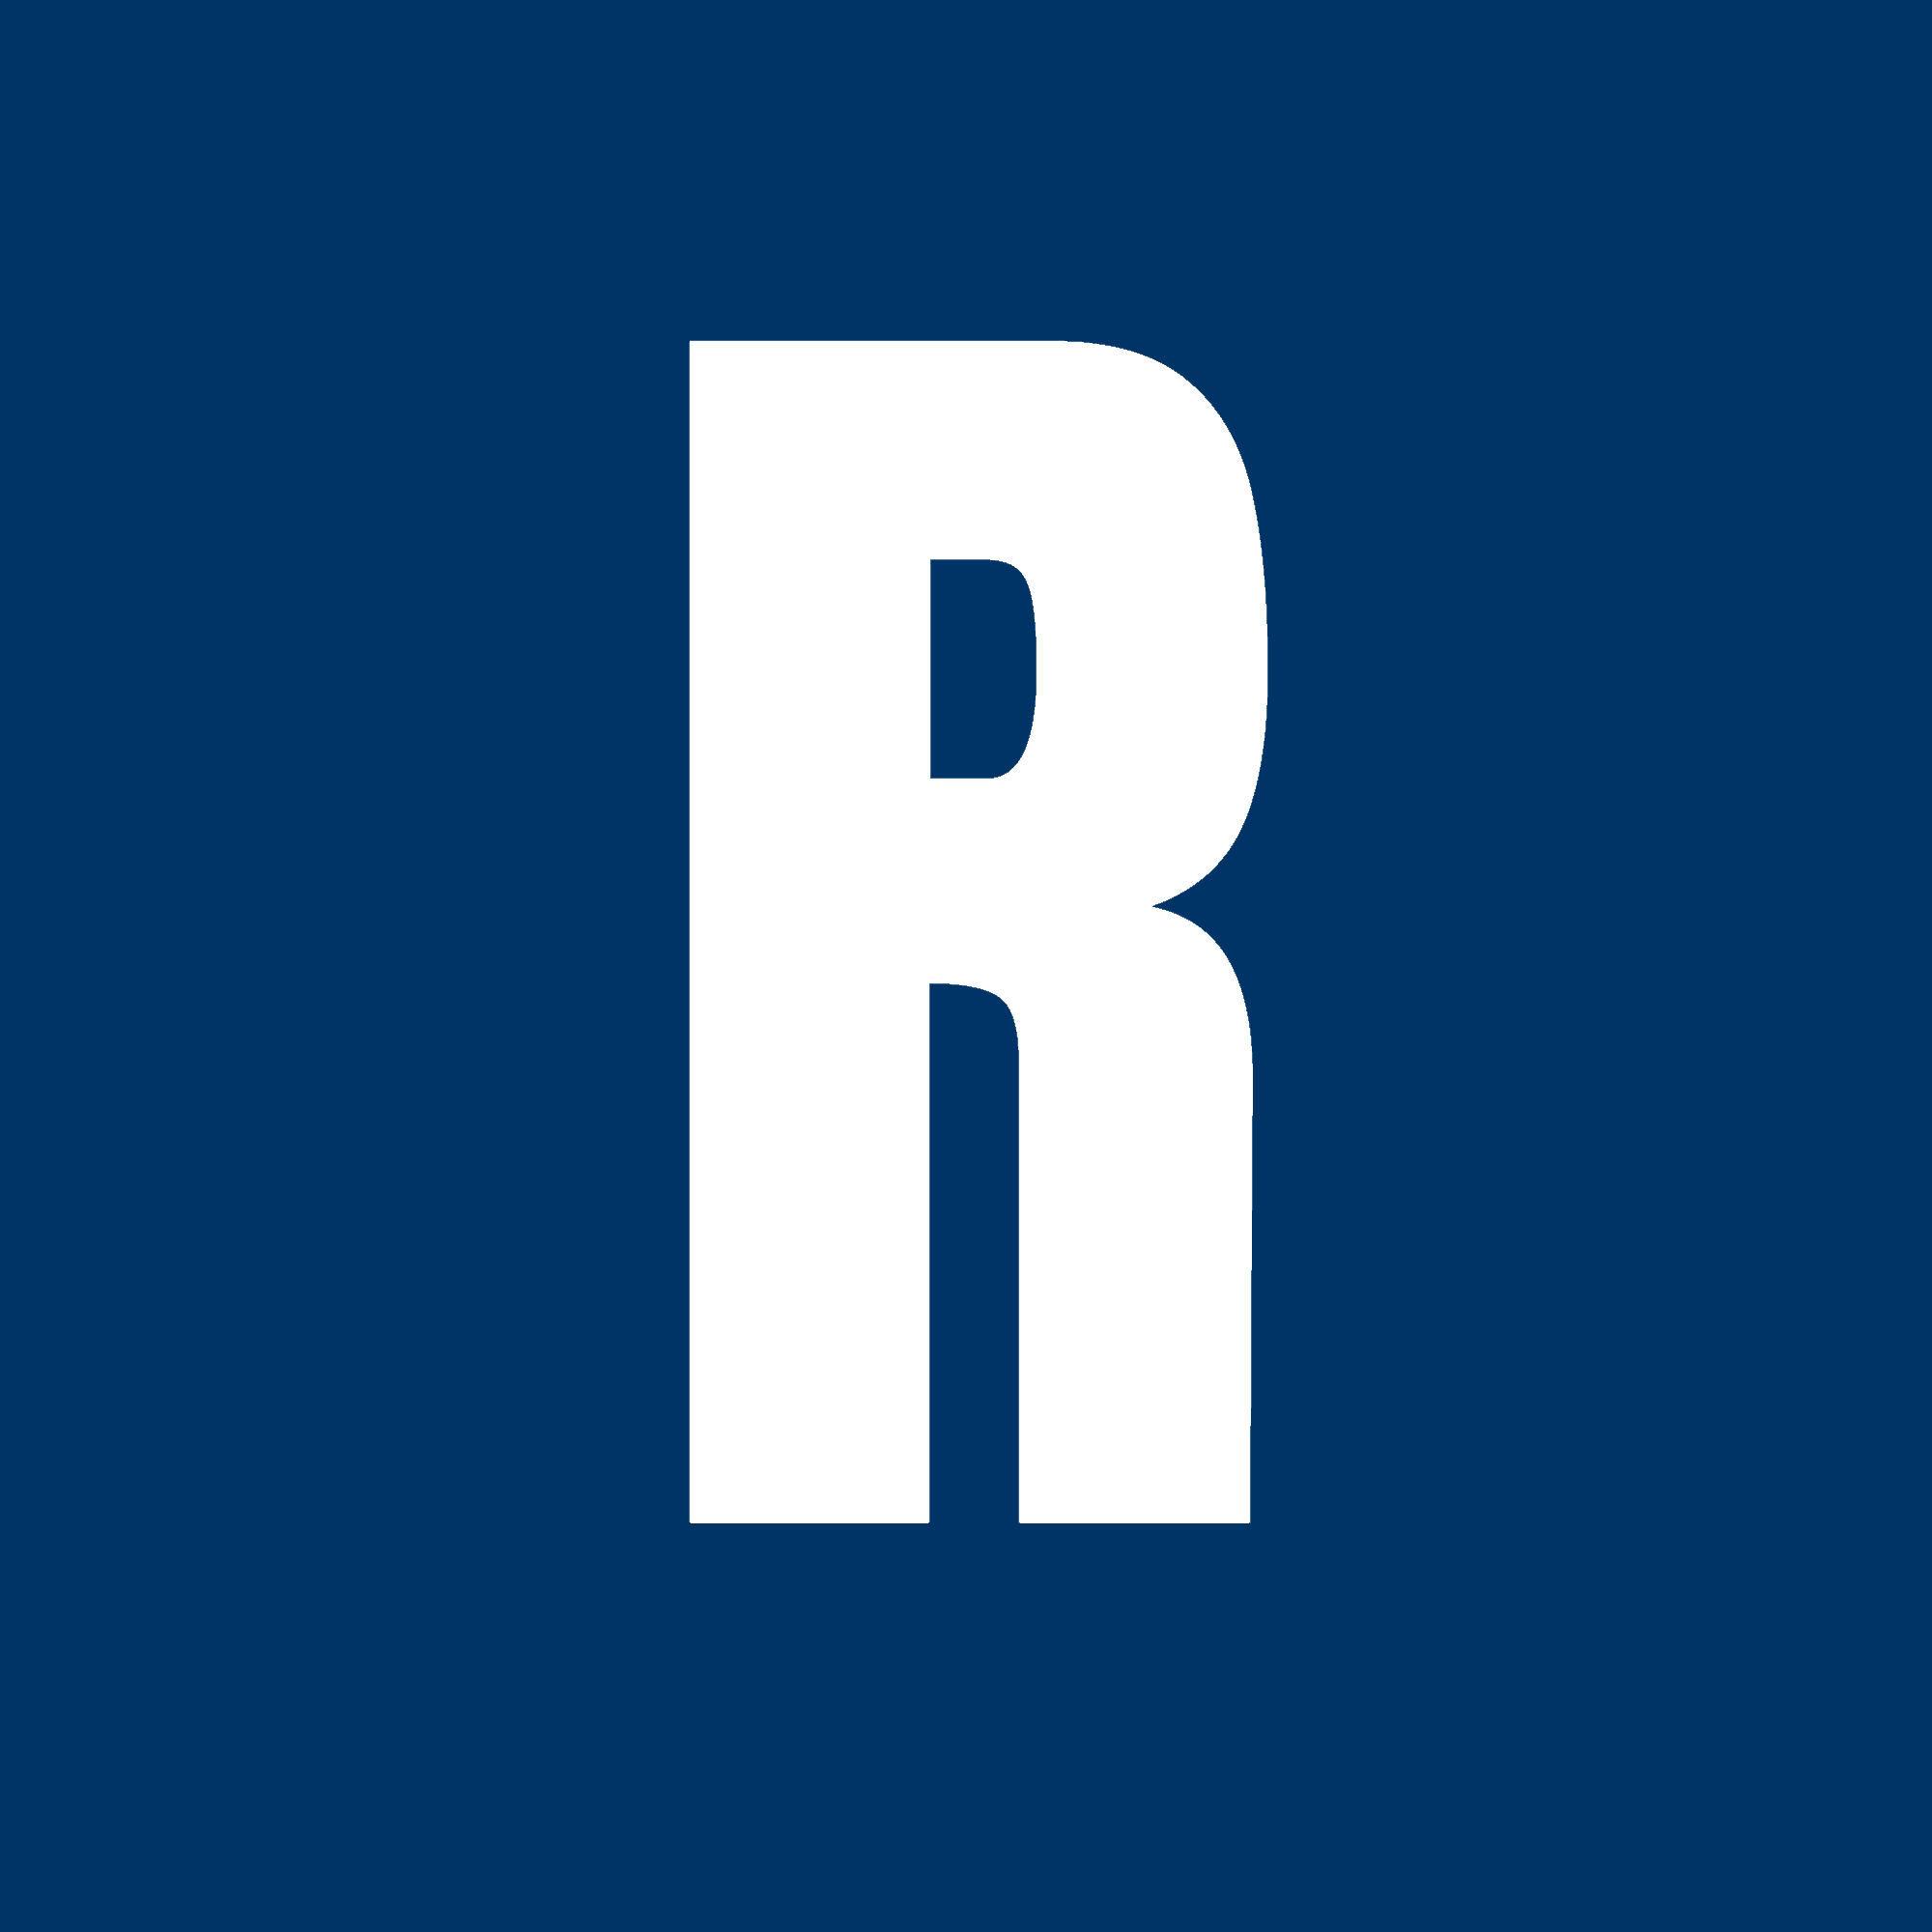 This is the logo of the Reno icon